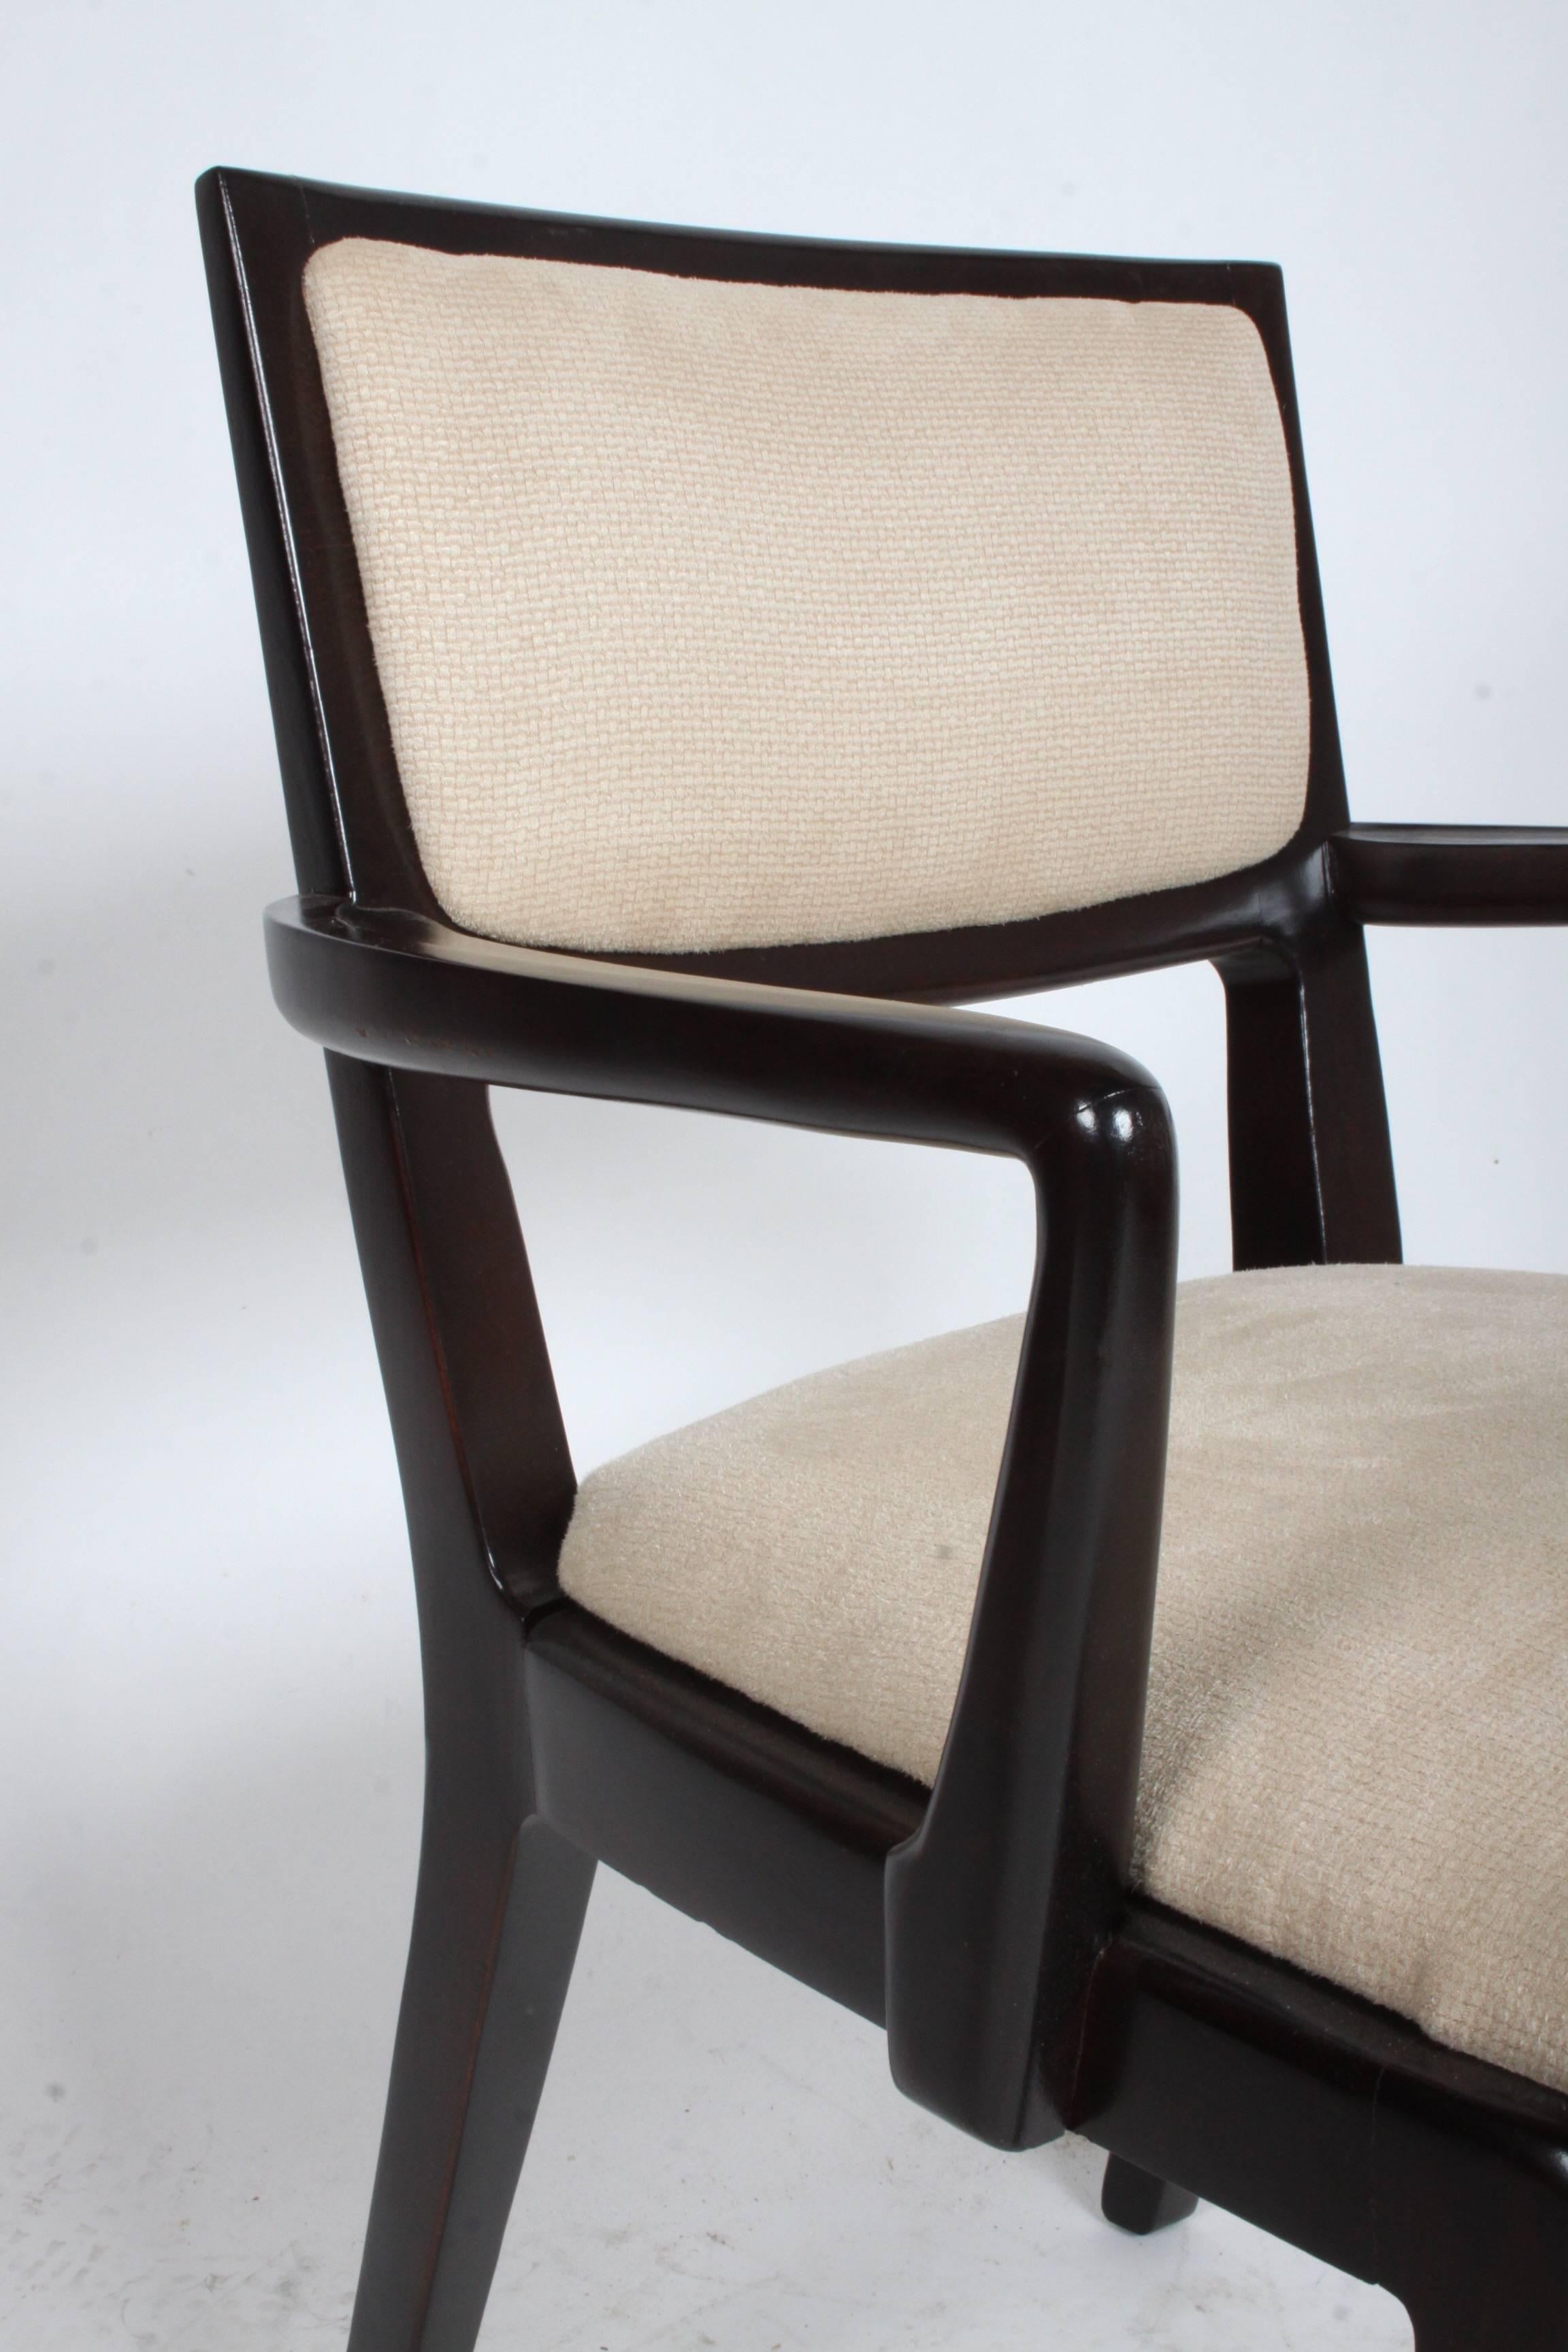 Mid-20th Century Pair of Edward Wormley for Drexel Arm Chairs - Precedent Collection  For Sale